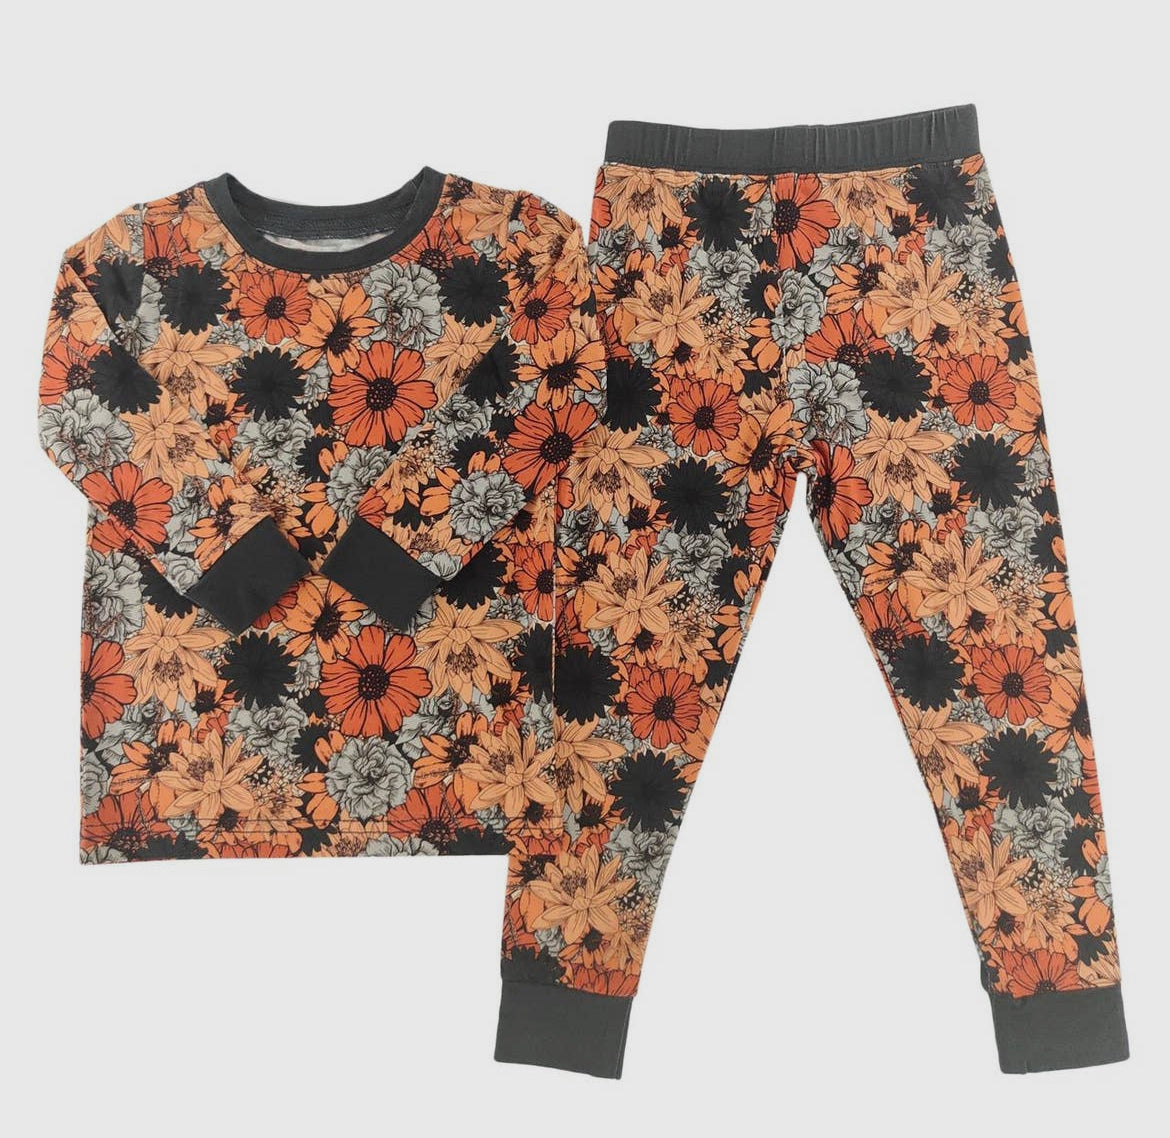 Fall Floral set